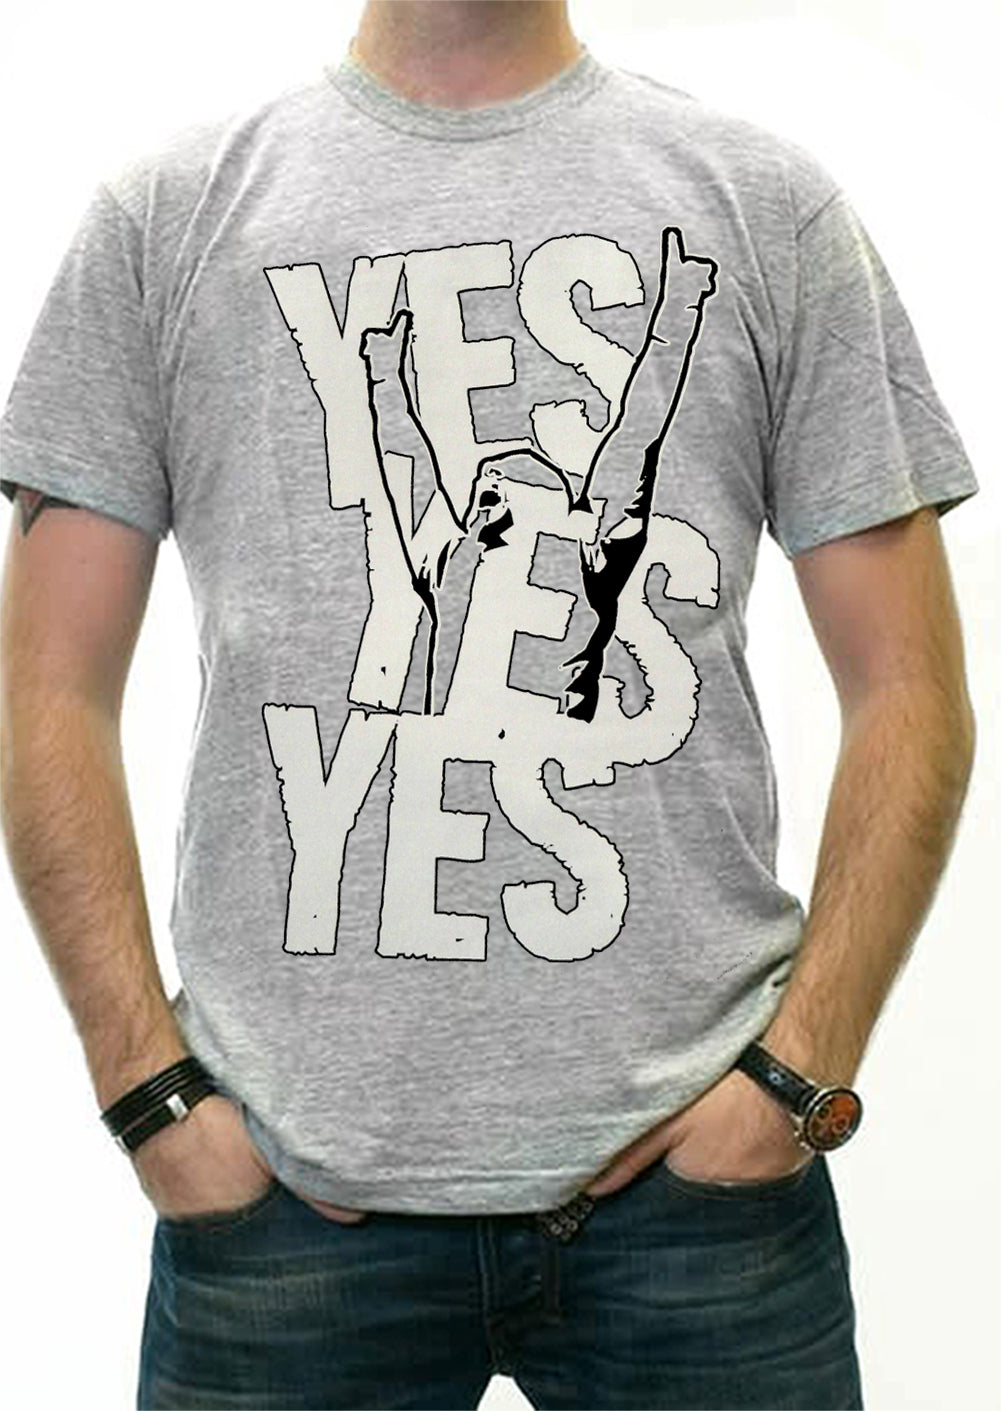 Yes Yes Yes Men's T-Shirt – Bewild